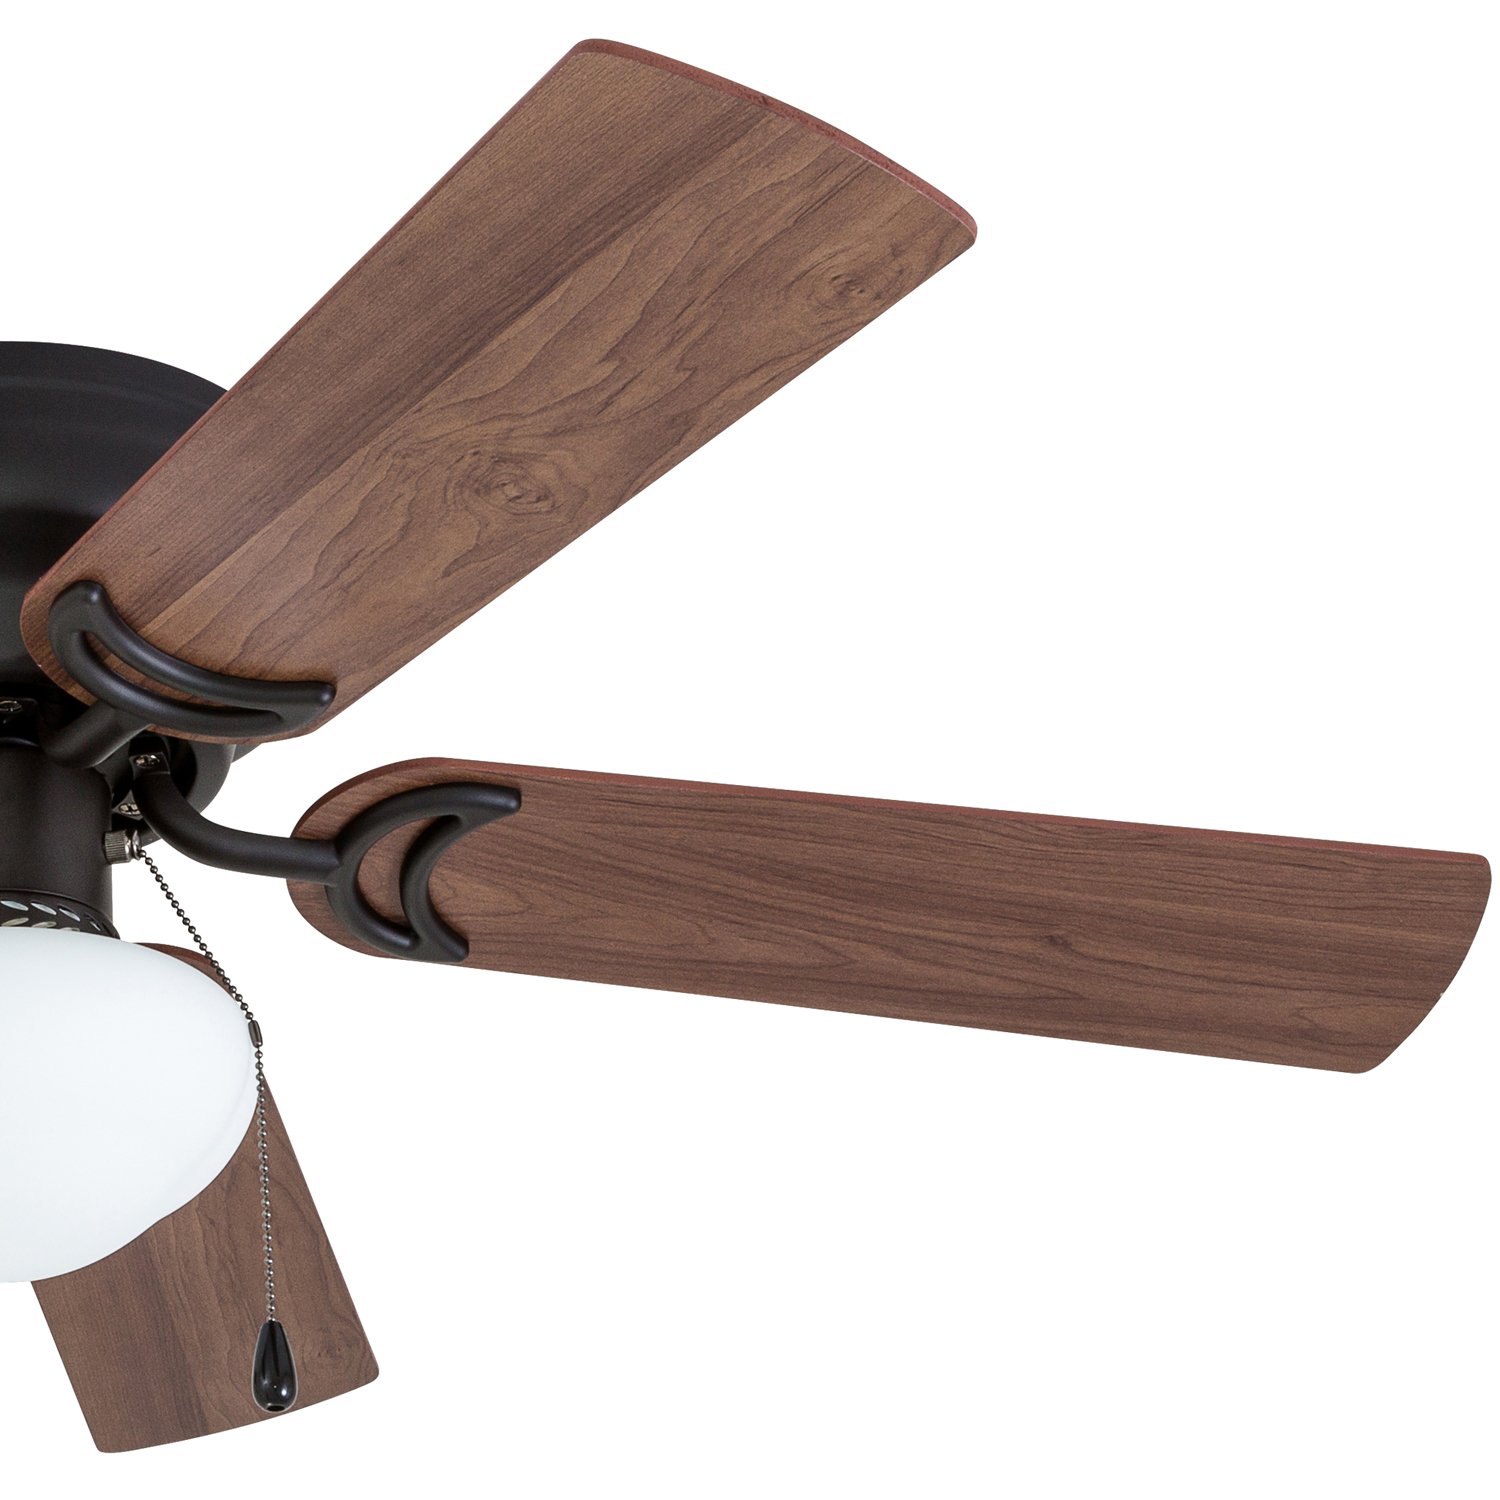 Prominence Home Alvina, 42 Inch Traditional Flush Mount Indoor LED Ceiling Fan with Light, Pull Chain, Dual Finish Blades, Reversible Motor - 50860-01 (Bronze)